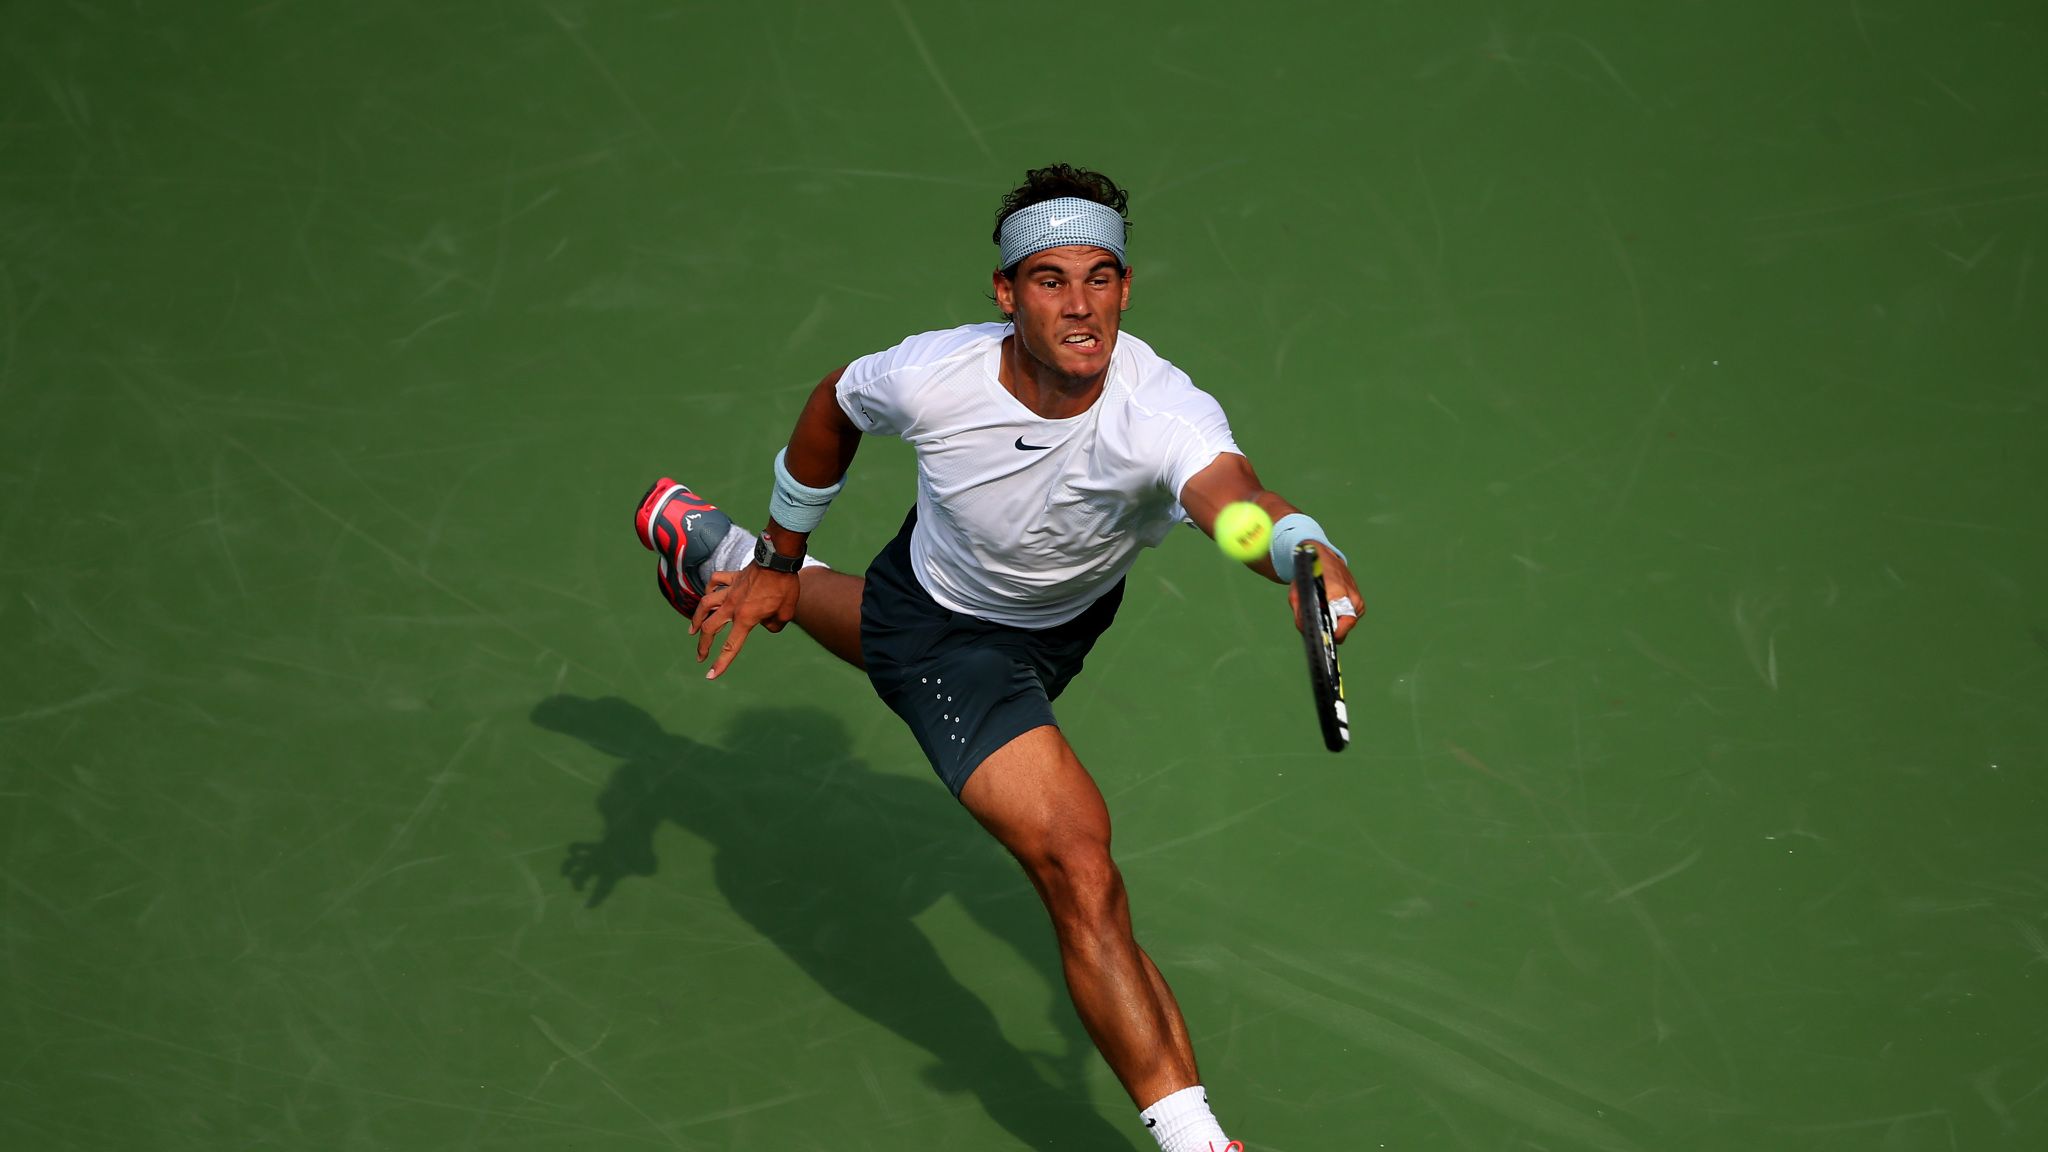 US Open Rafael Nadal at his efficient best during thirdround victory